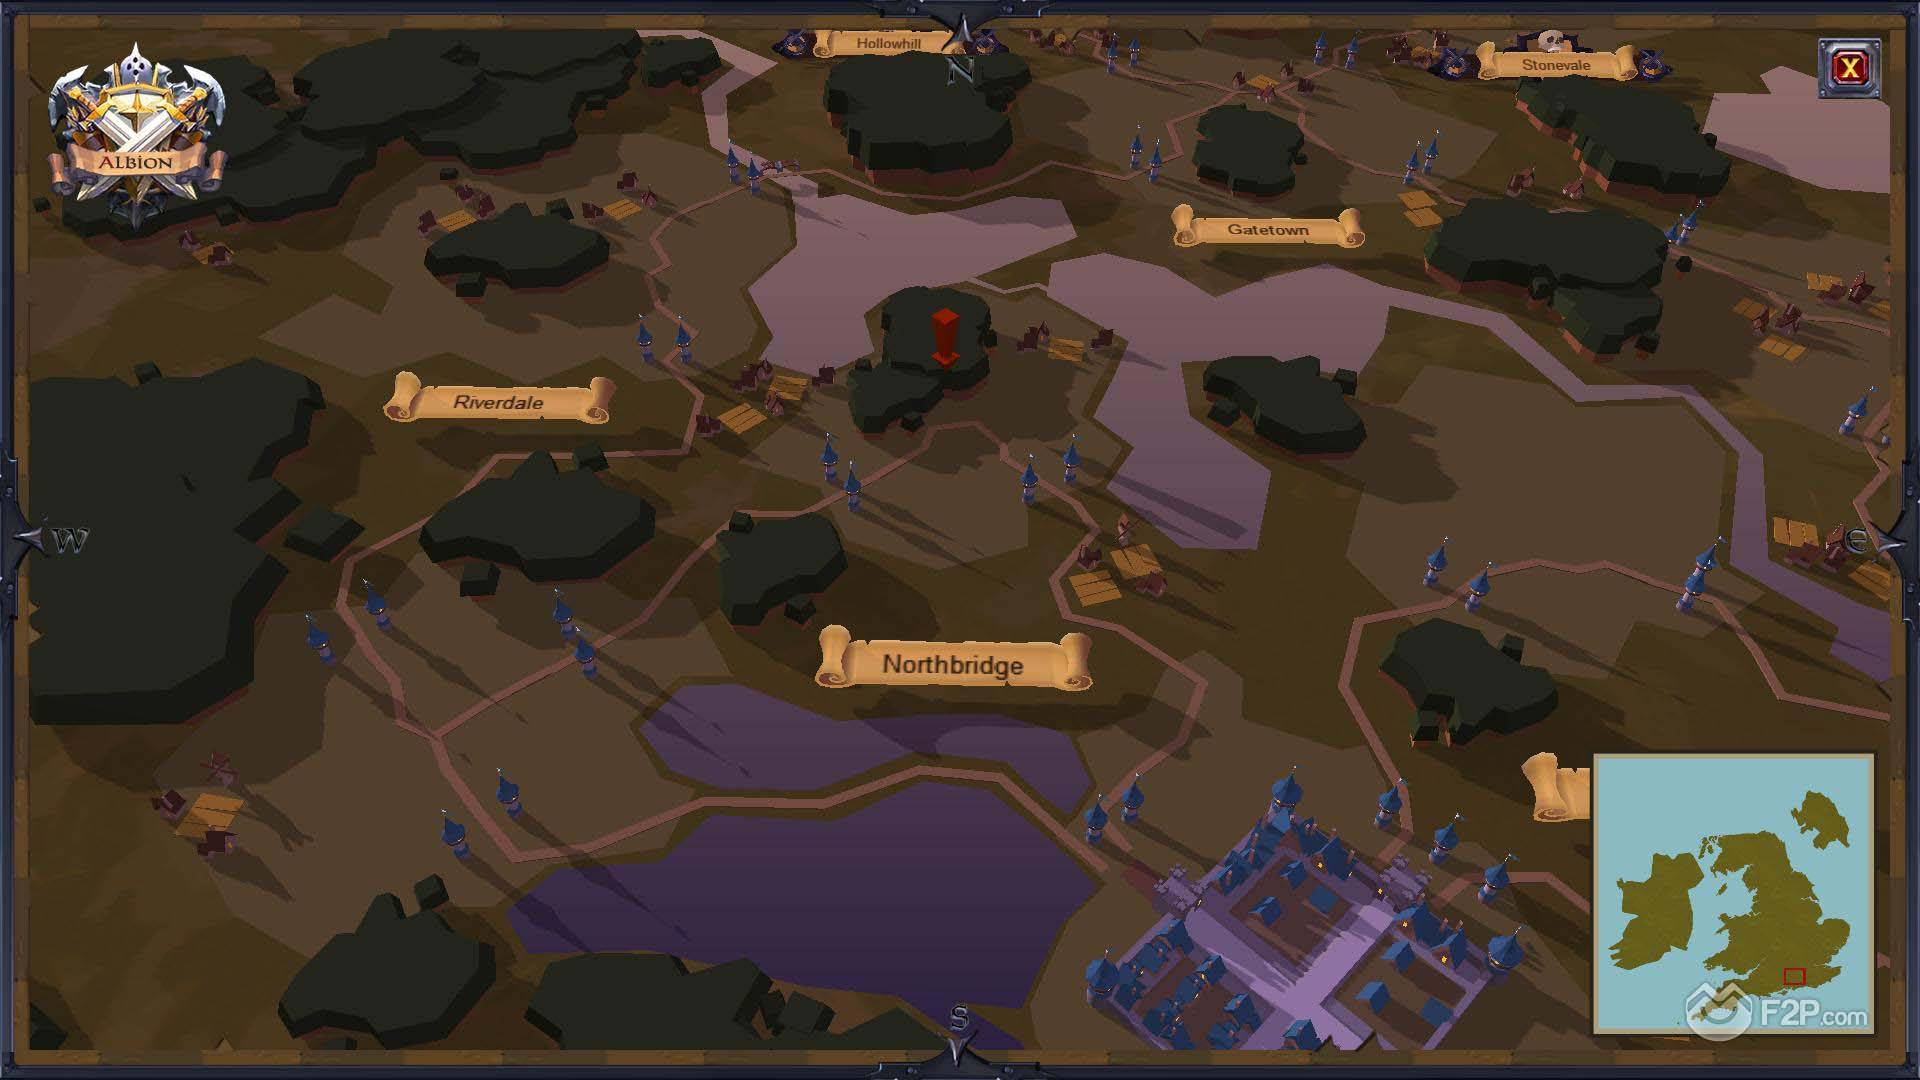 Albion Online's closed beta trailer promotes player cities and maps